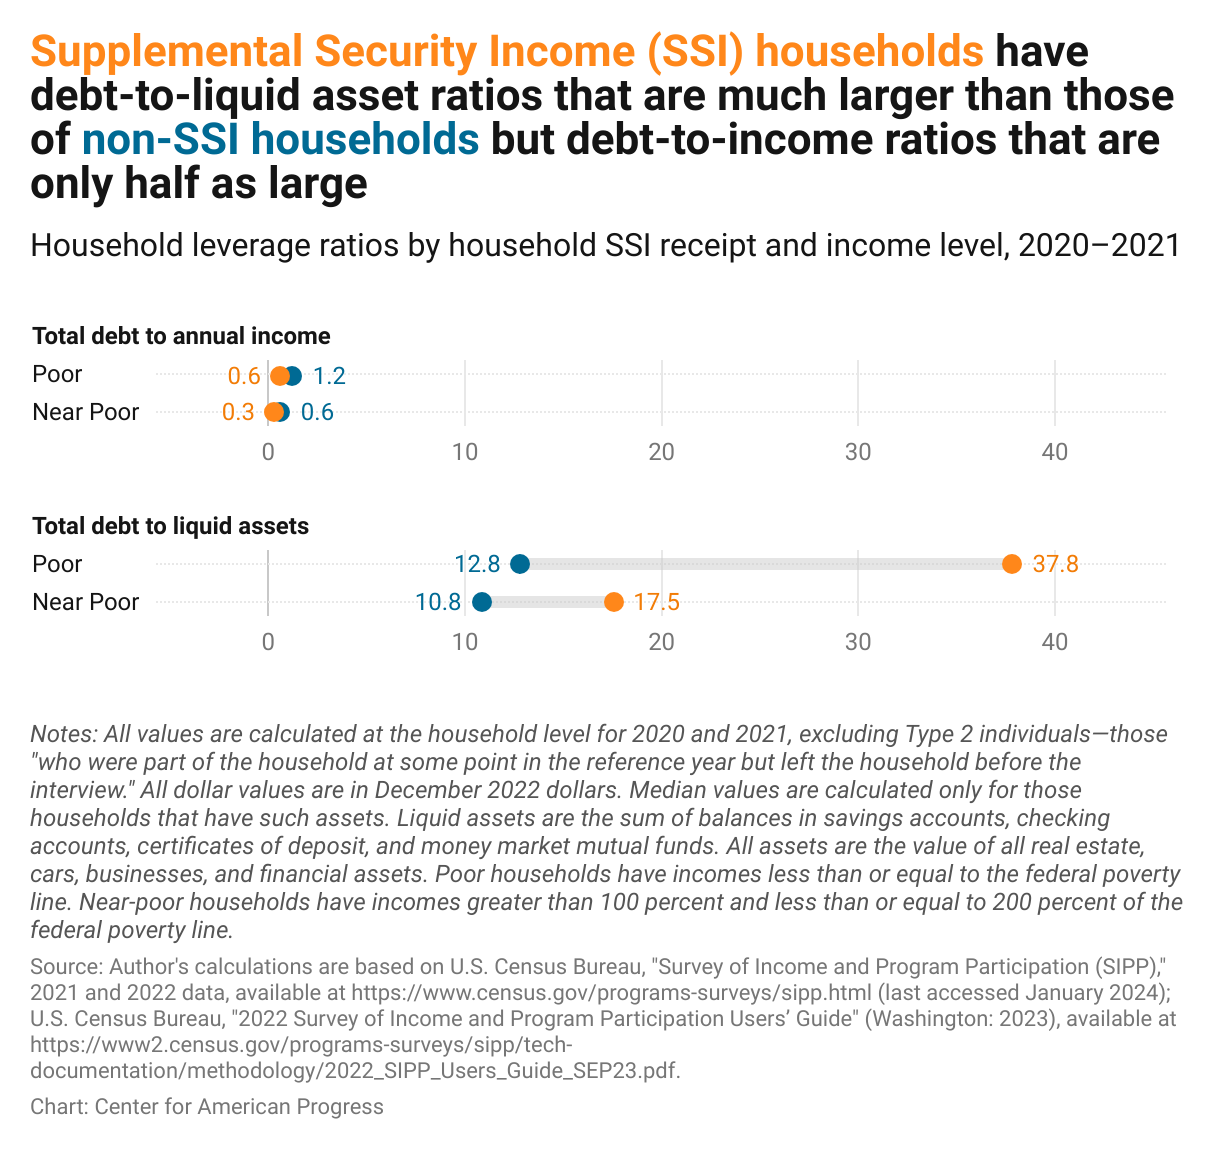 Chart showing that among low-income households, those that receive SSI benefits have lower debt-to-income ratios; for example, poor SSI households have a total debt-to-income ratio of 12.8, compared with 37.8 for non-SSI households.